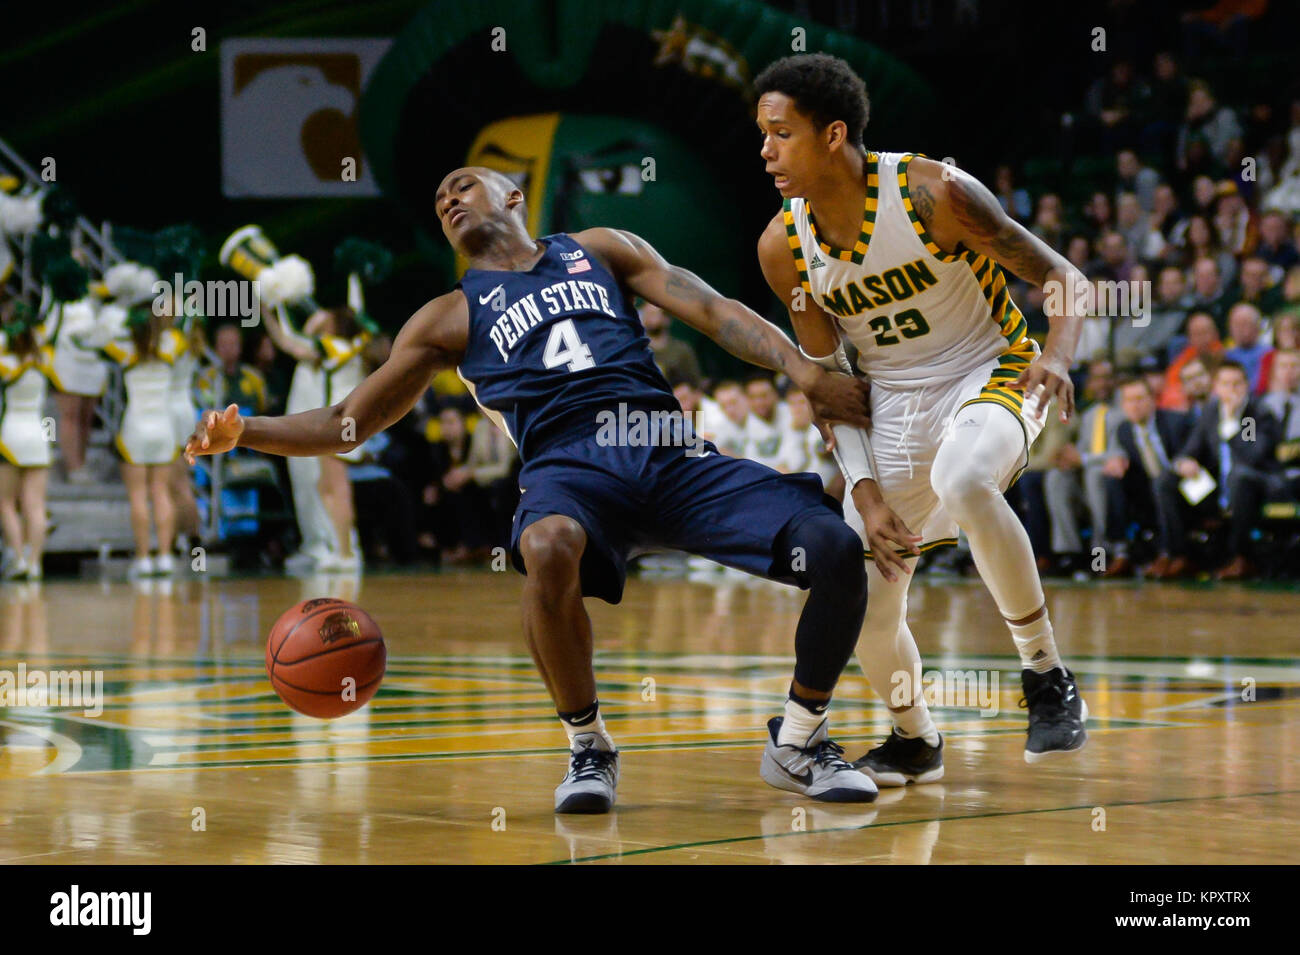 Fairfax, Virginia, USA. 17th Dec, 2017. NAZEER BOSTICK (4) is fowled by JAVON GREENE (23) during the game held at EagleBank Arena in Fairfax, Virginia. Credit: Amy Sanderson/ZUMA Wire/Alamy Live News Stock Photo